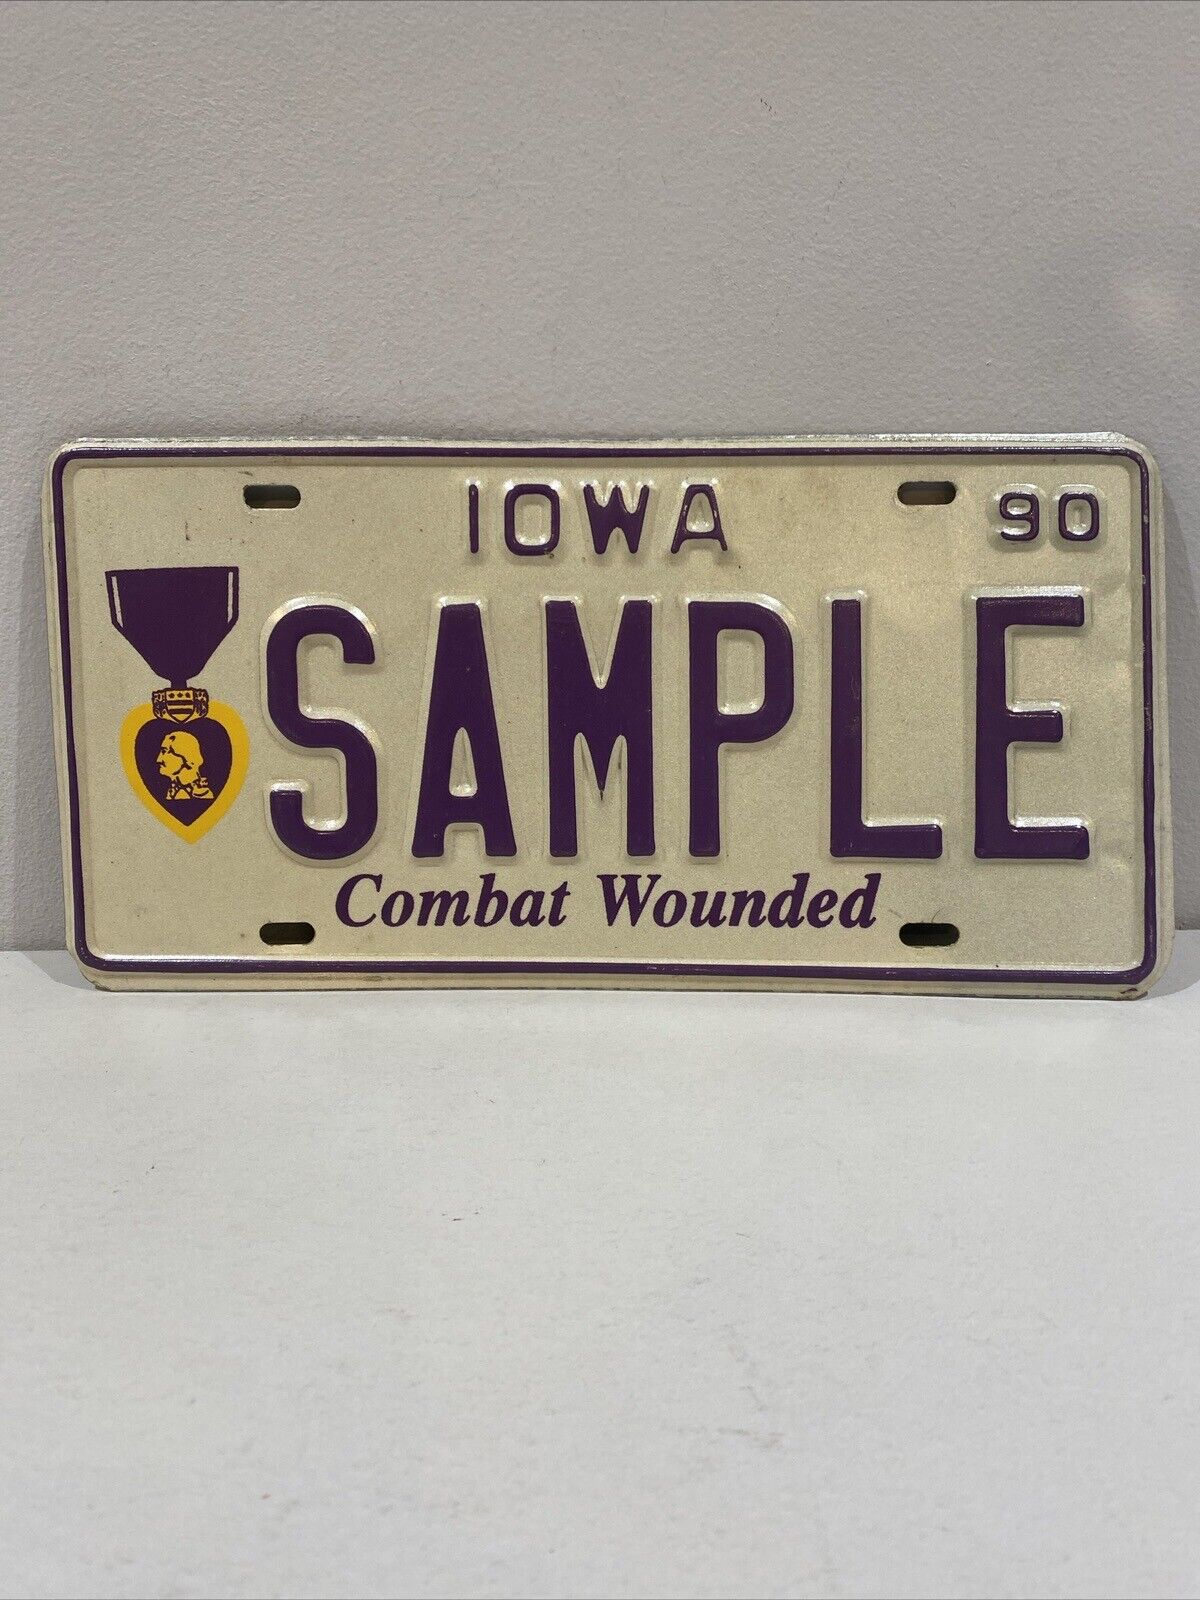 Vintage 1990 Iowa Retired Combat Wounded SAMPLE License Plate Tag Original Metal